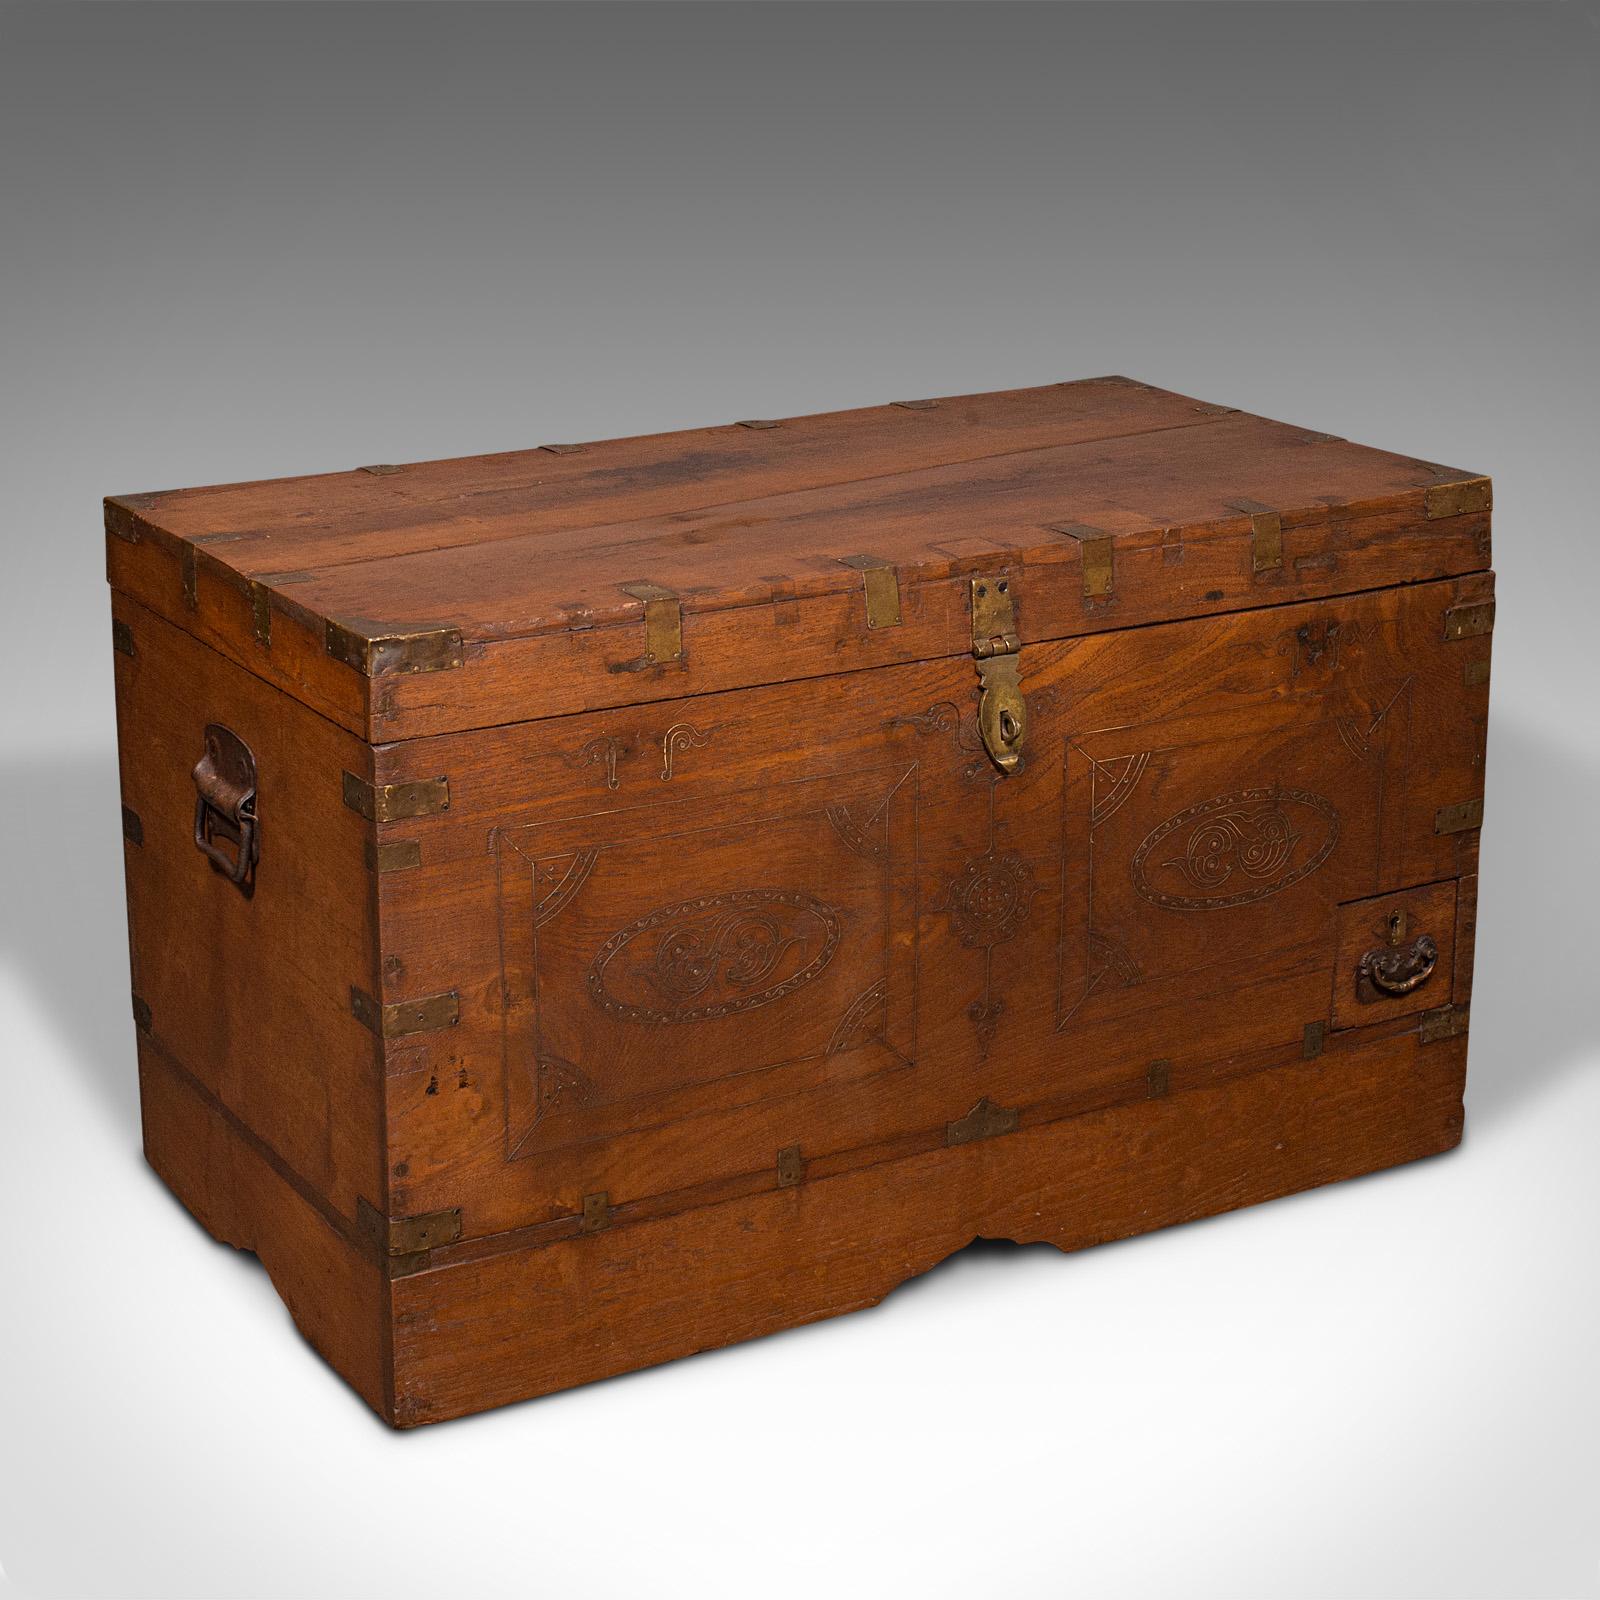 This is an antique travelling cleric's chest. An Anglo-Indian, teak colonial trunk with fitted interior, dating to the late Victorian period, circa 1880.

Delightful fitted interior with a host of storage solutions
Displays a desirable aged